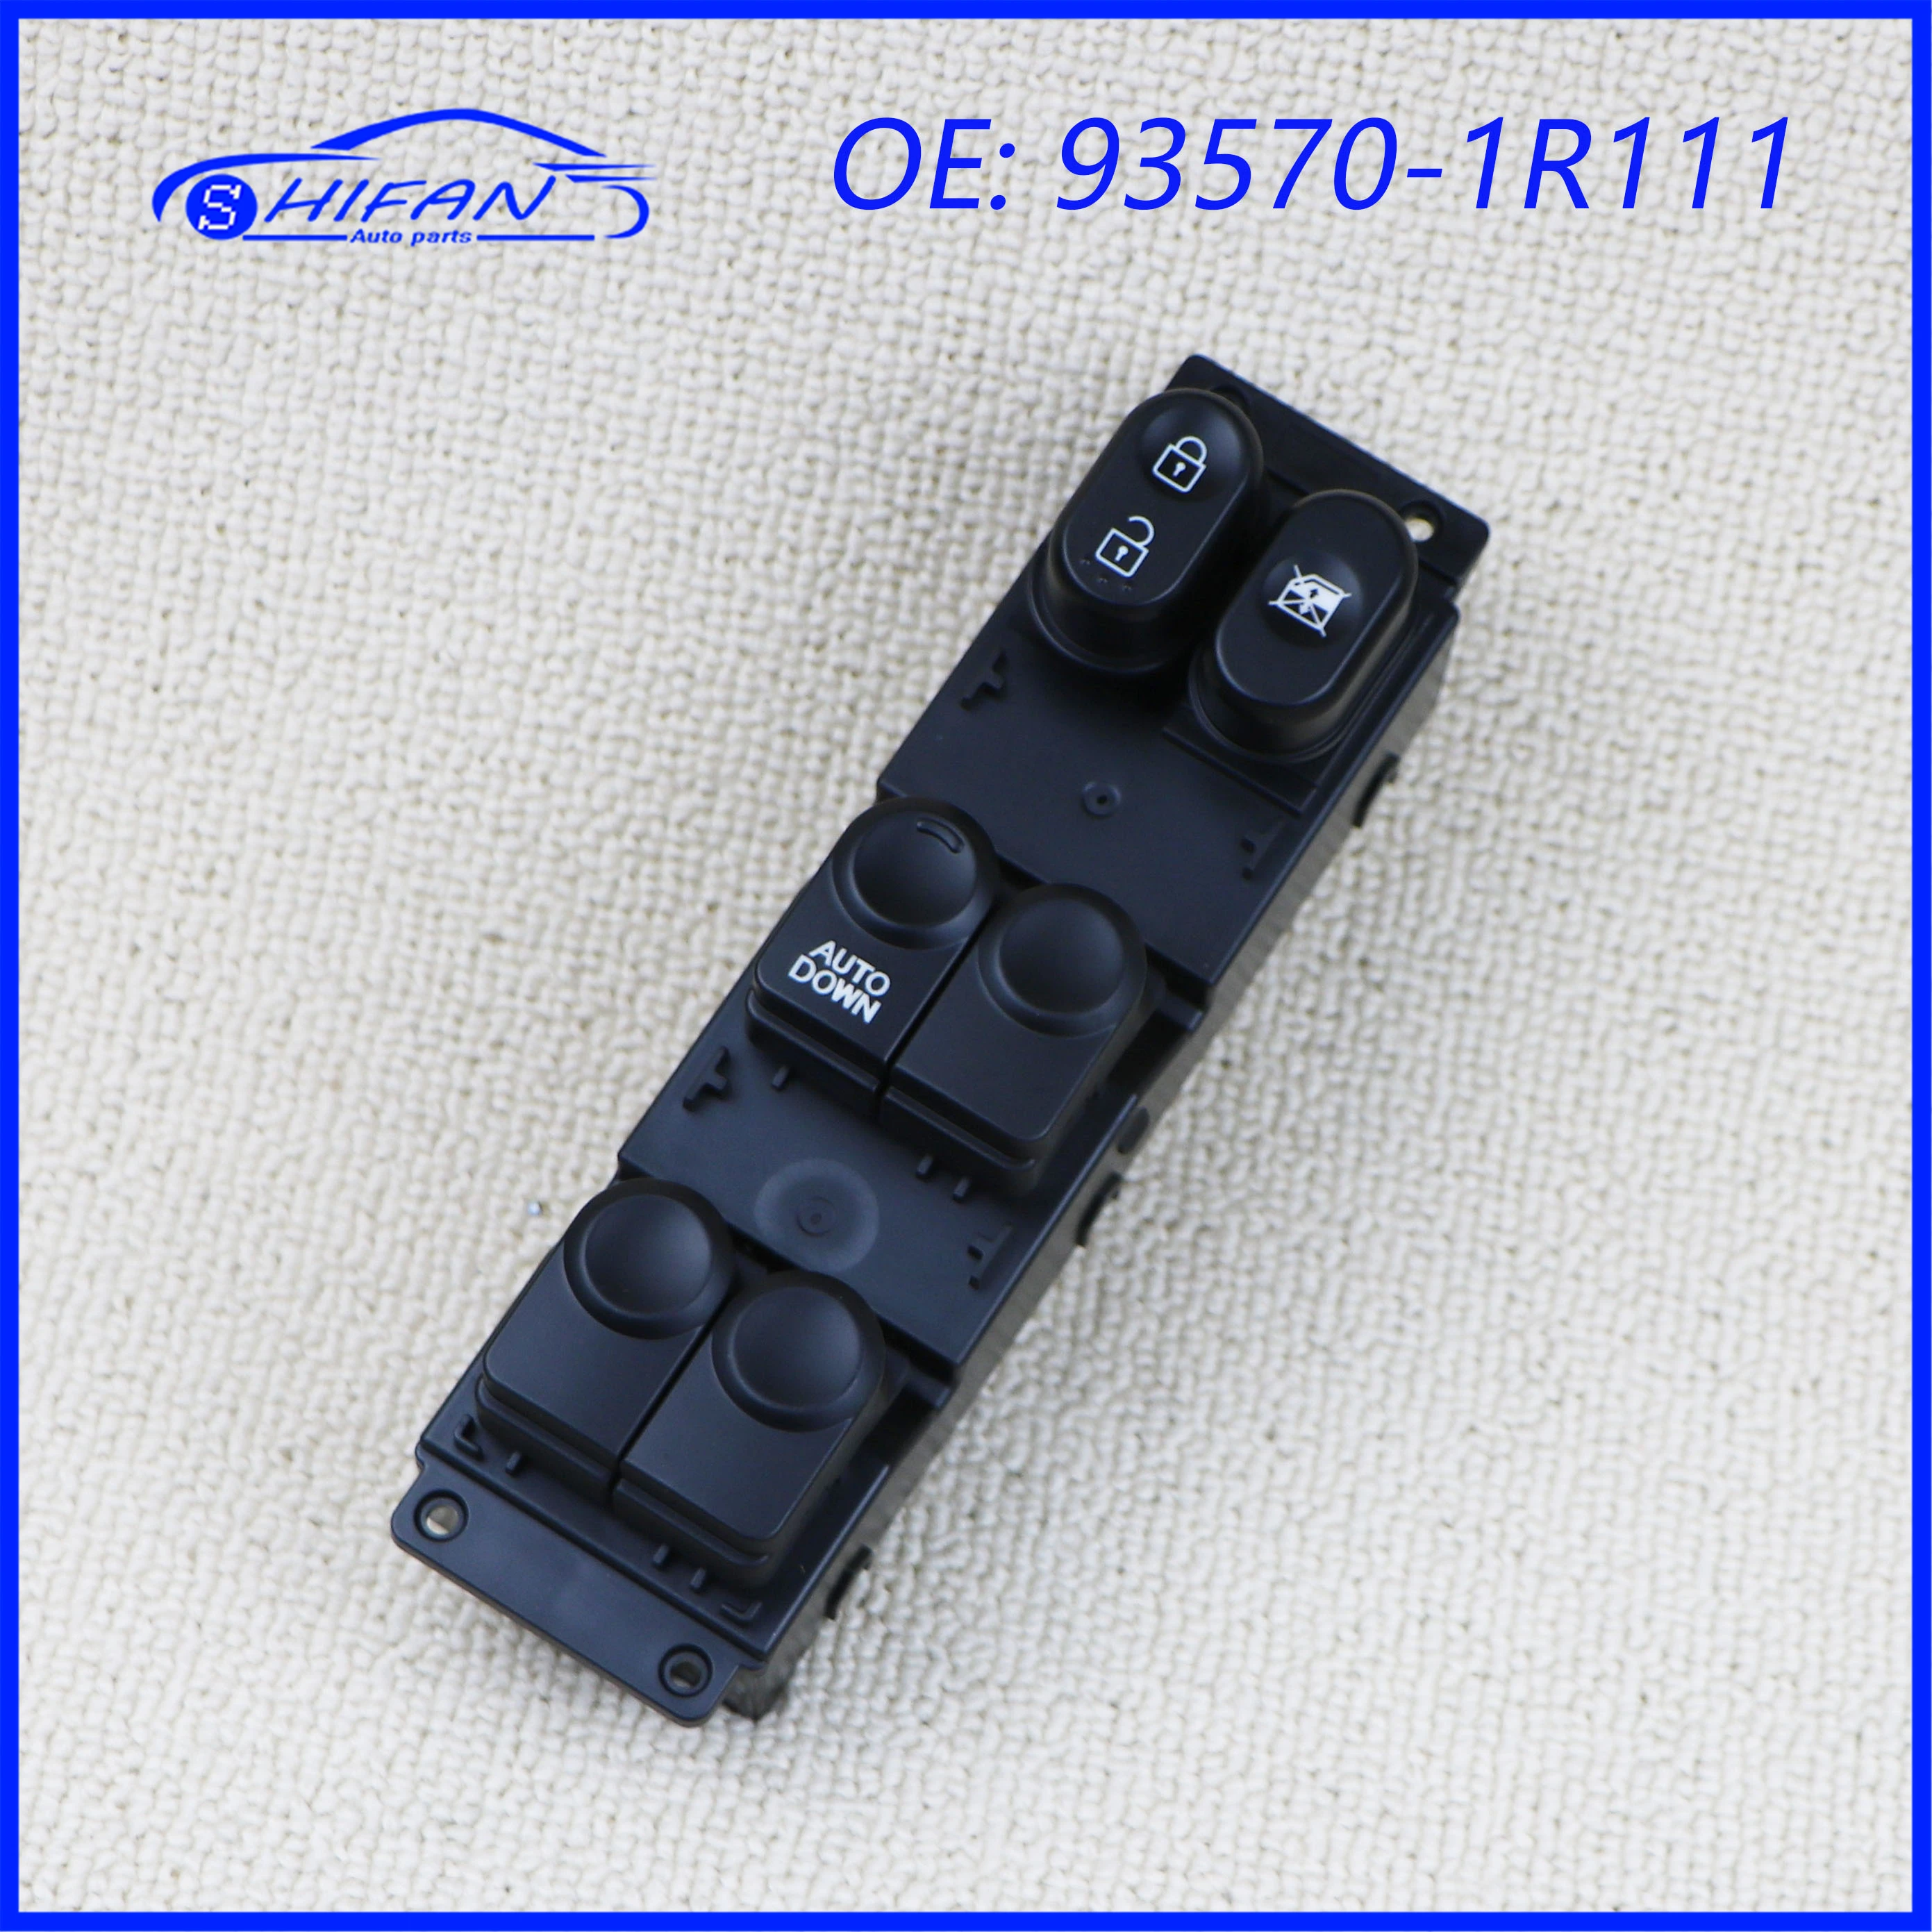 93570-1R111 Car Power Window Control Switch Electric Switch For Hyundai Accent 2010-2017 Car Accessories 935701R111